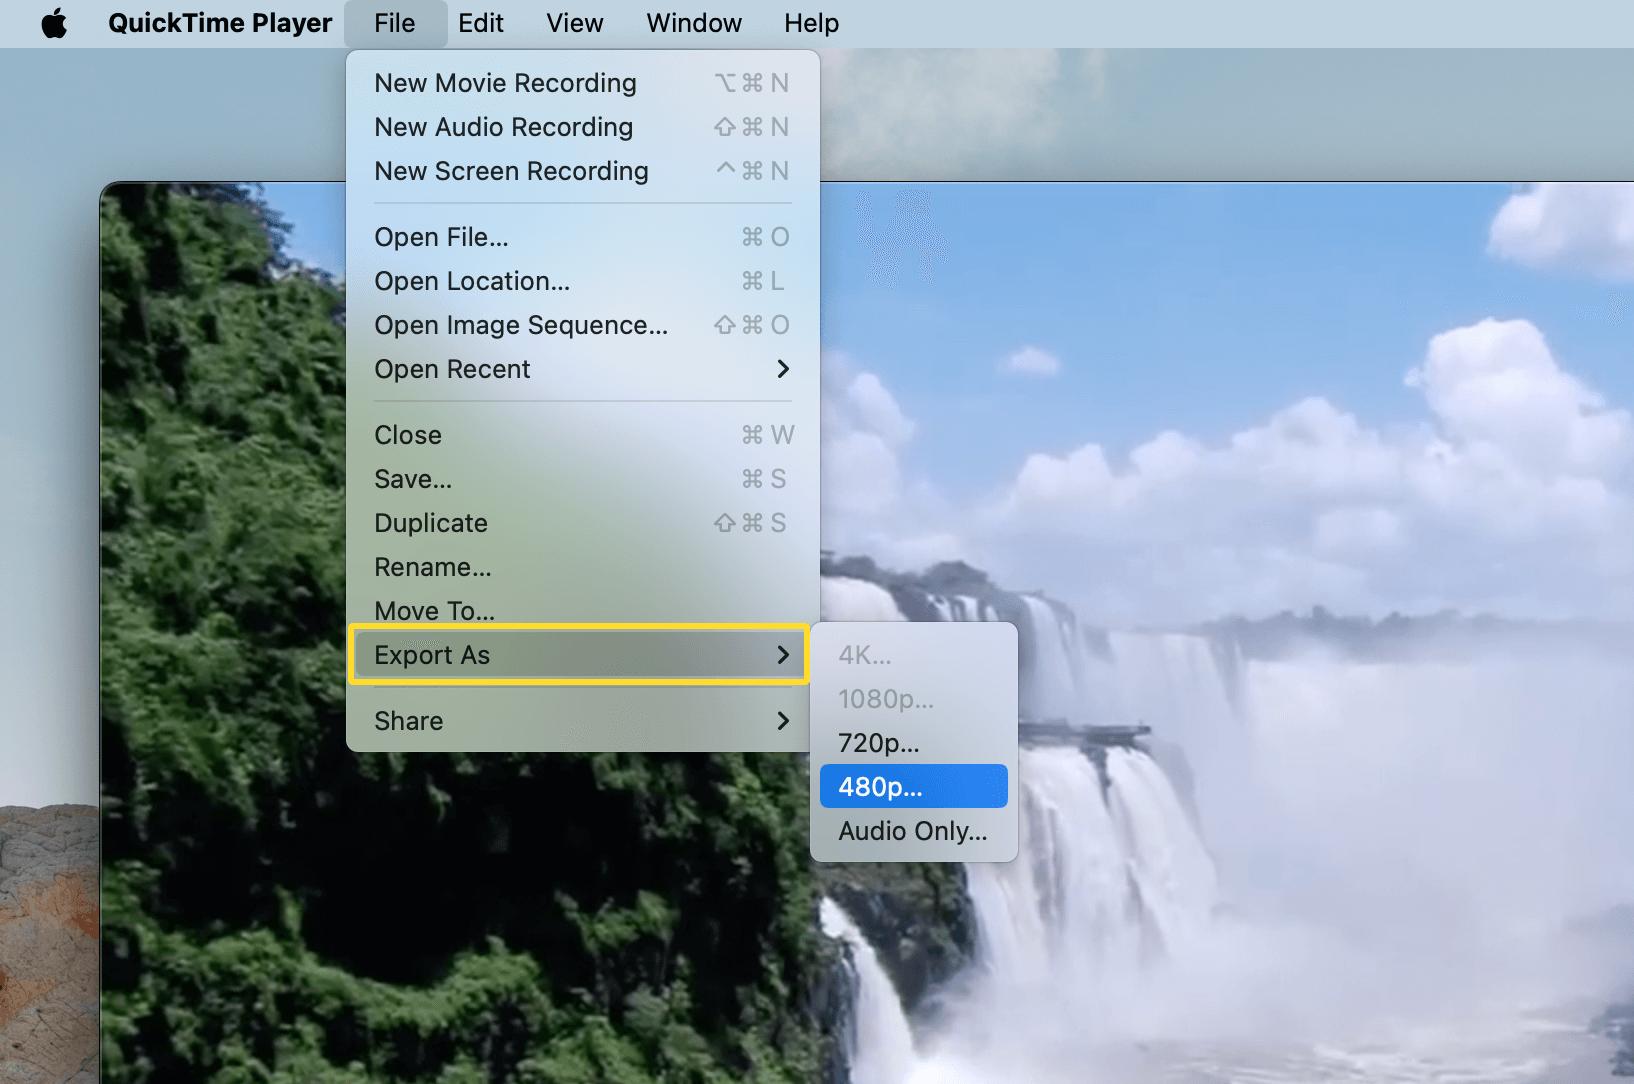 The QuickTime Player's File menu is opened and the Export As option is demonstrated